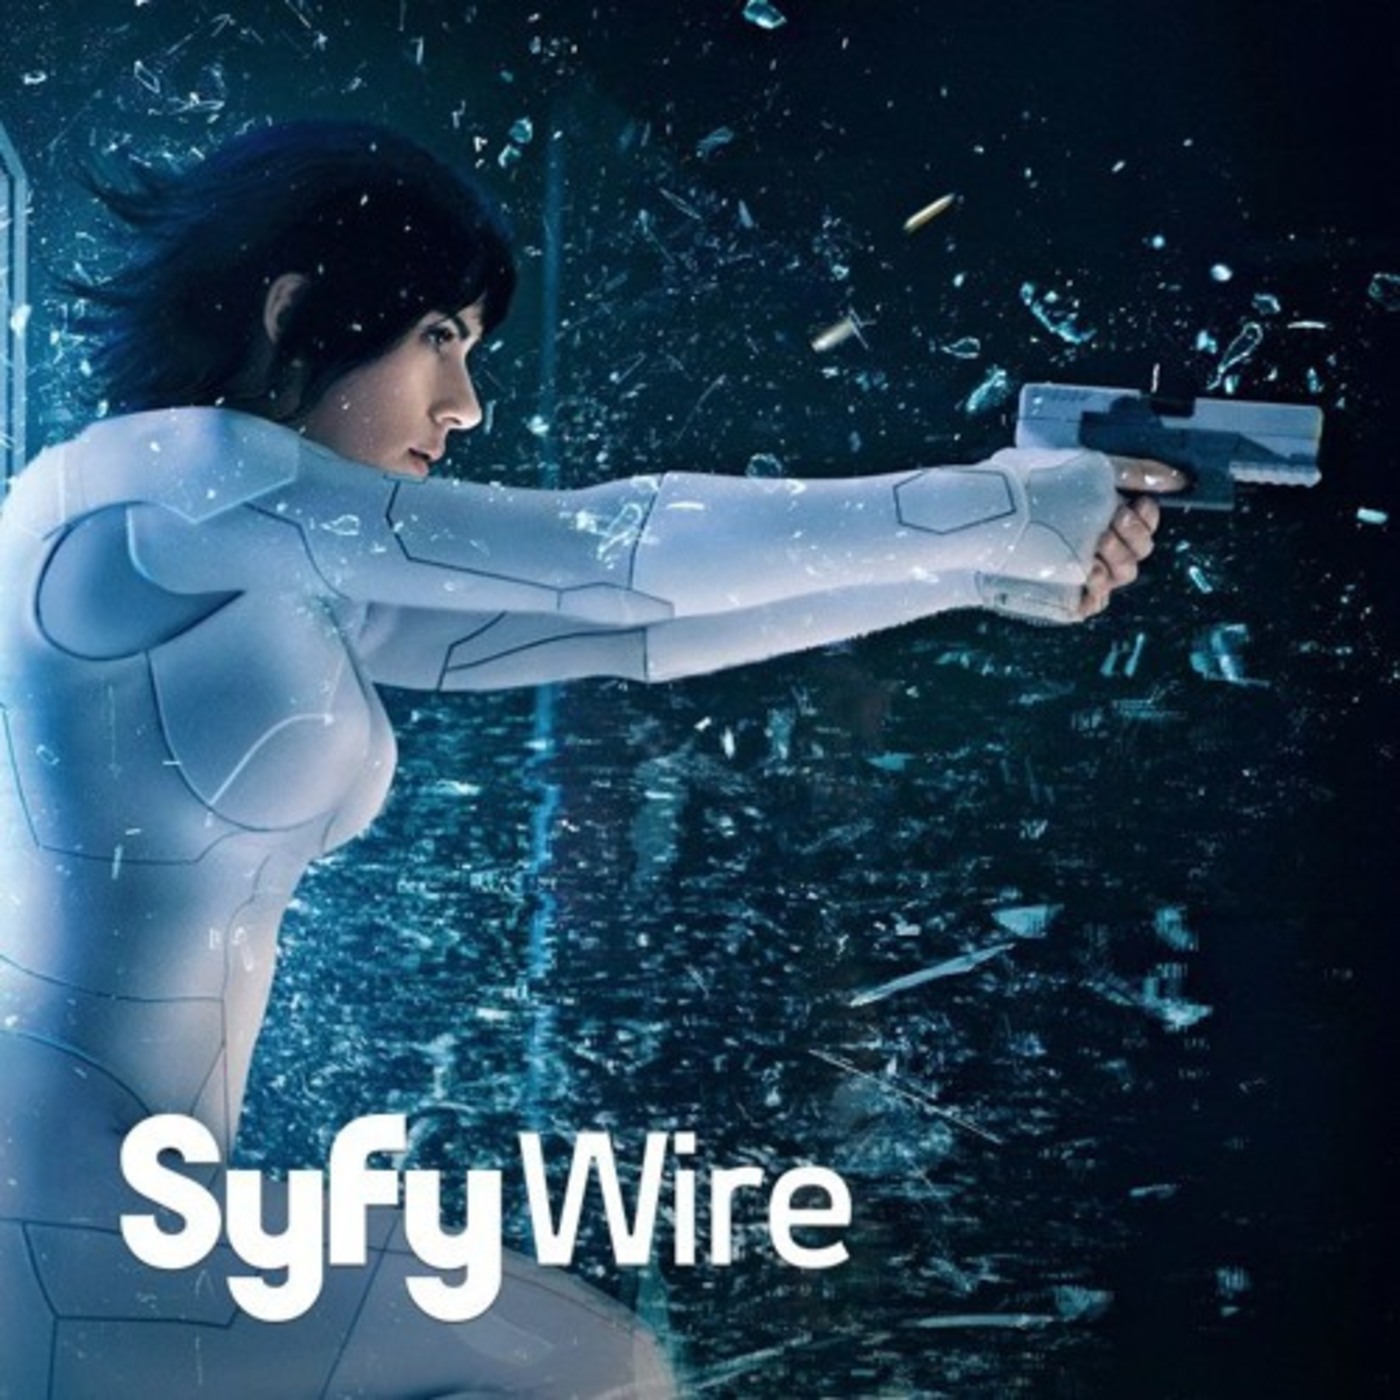 Who Won the Week Episode 69: Ghost in the Shell, Joss Whedon's Batgirl, and more! by Syfy Wire